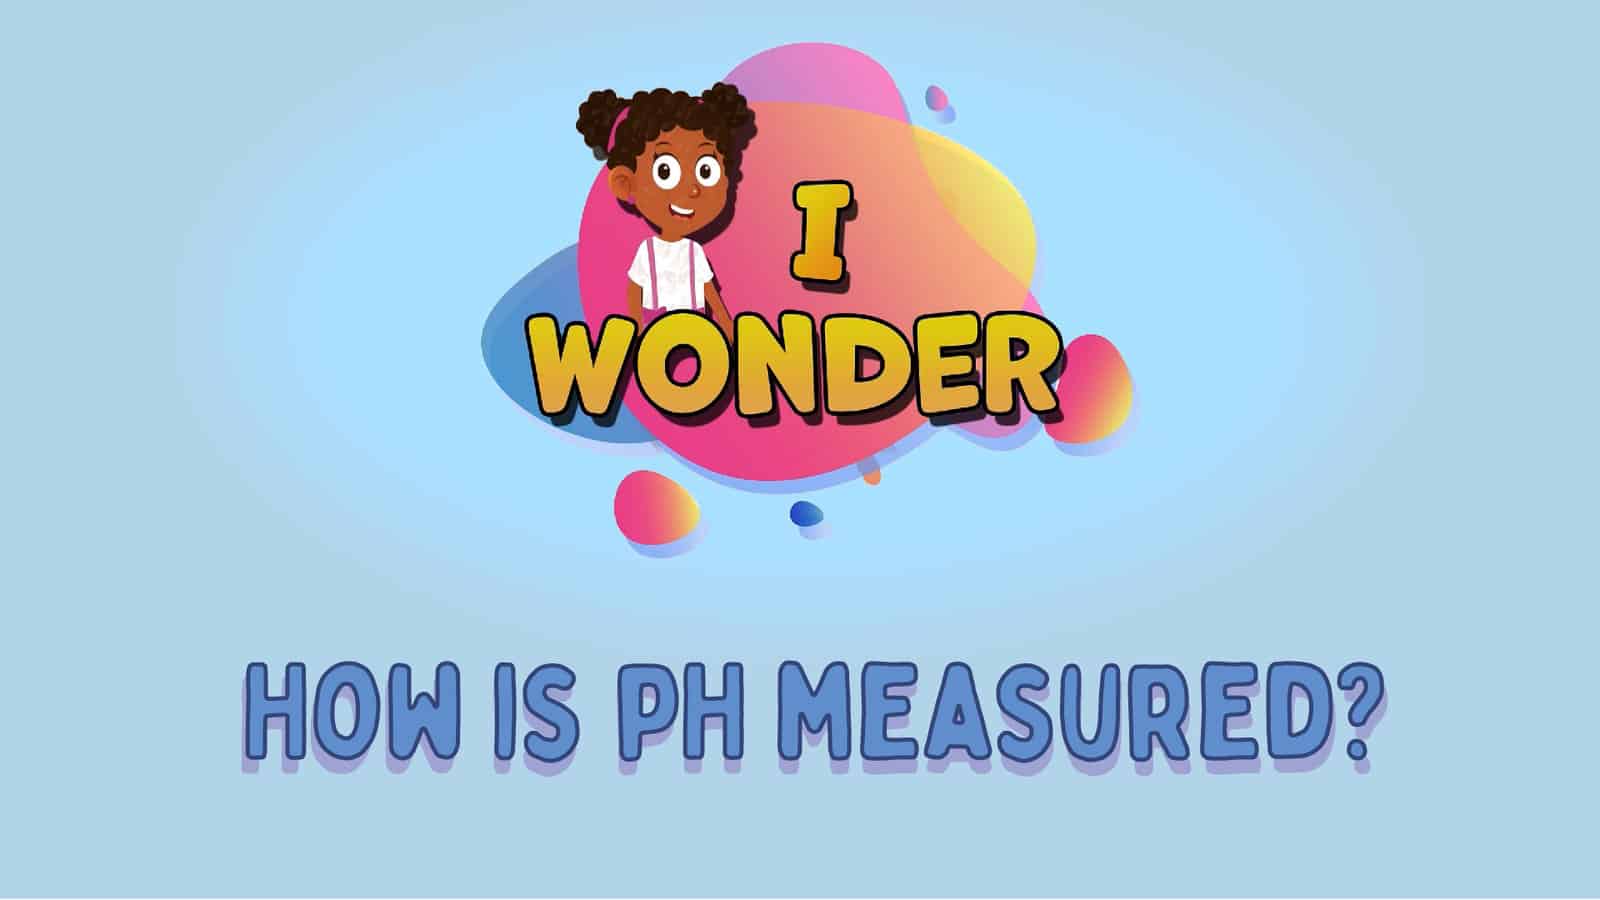 How Is PH Measured?